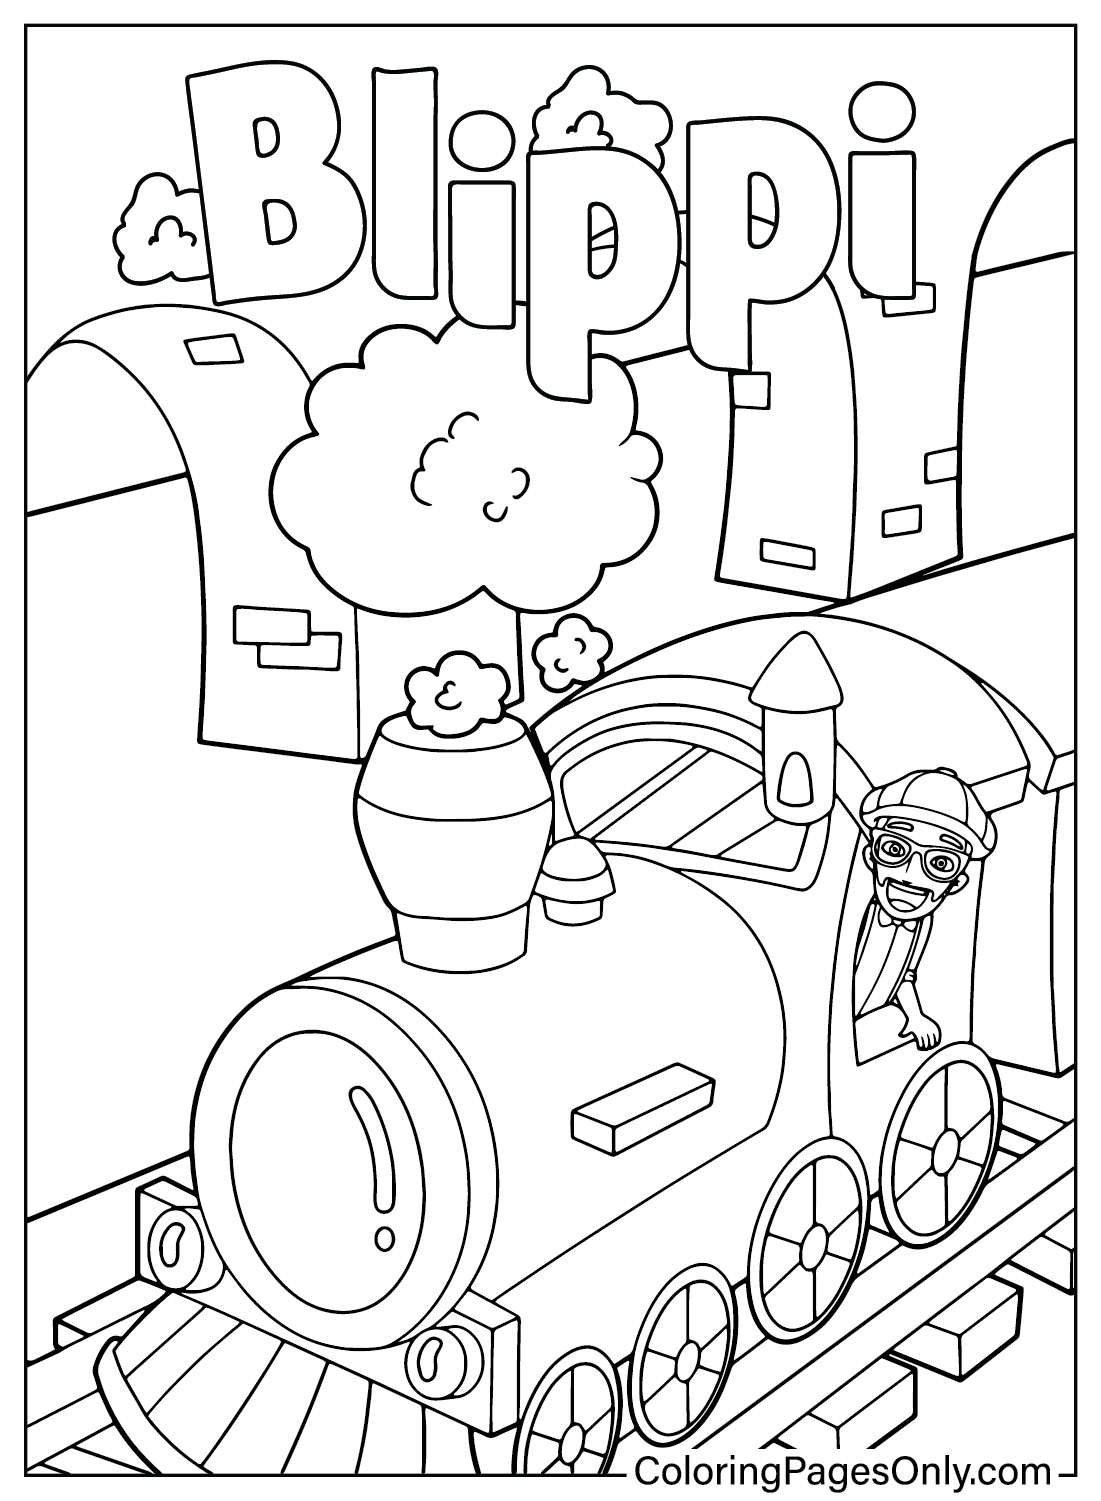 Blippi Coloring Pages to Printable from Blippi